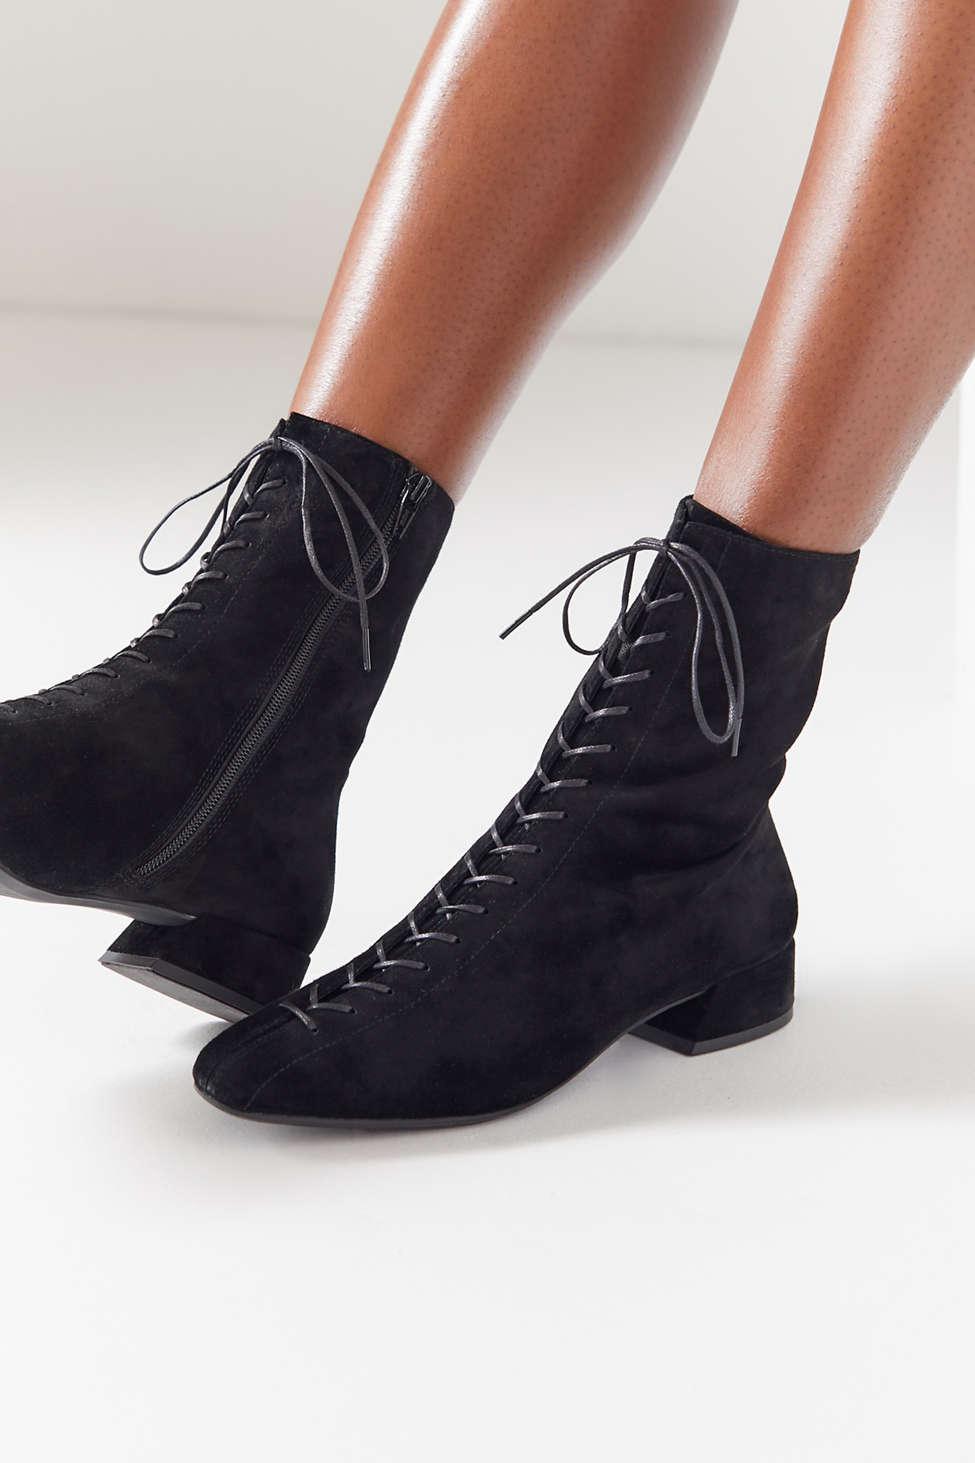 Vagabond Suede Joyce Lace-up in Black - Lyst